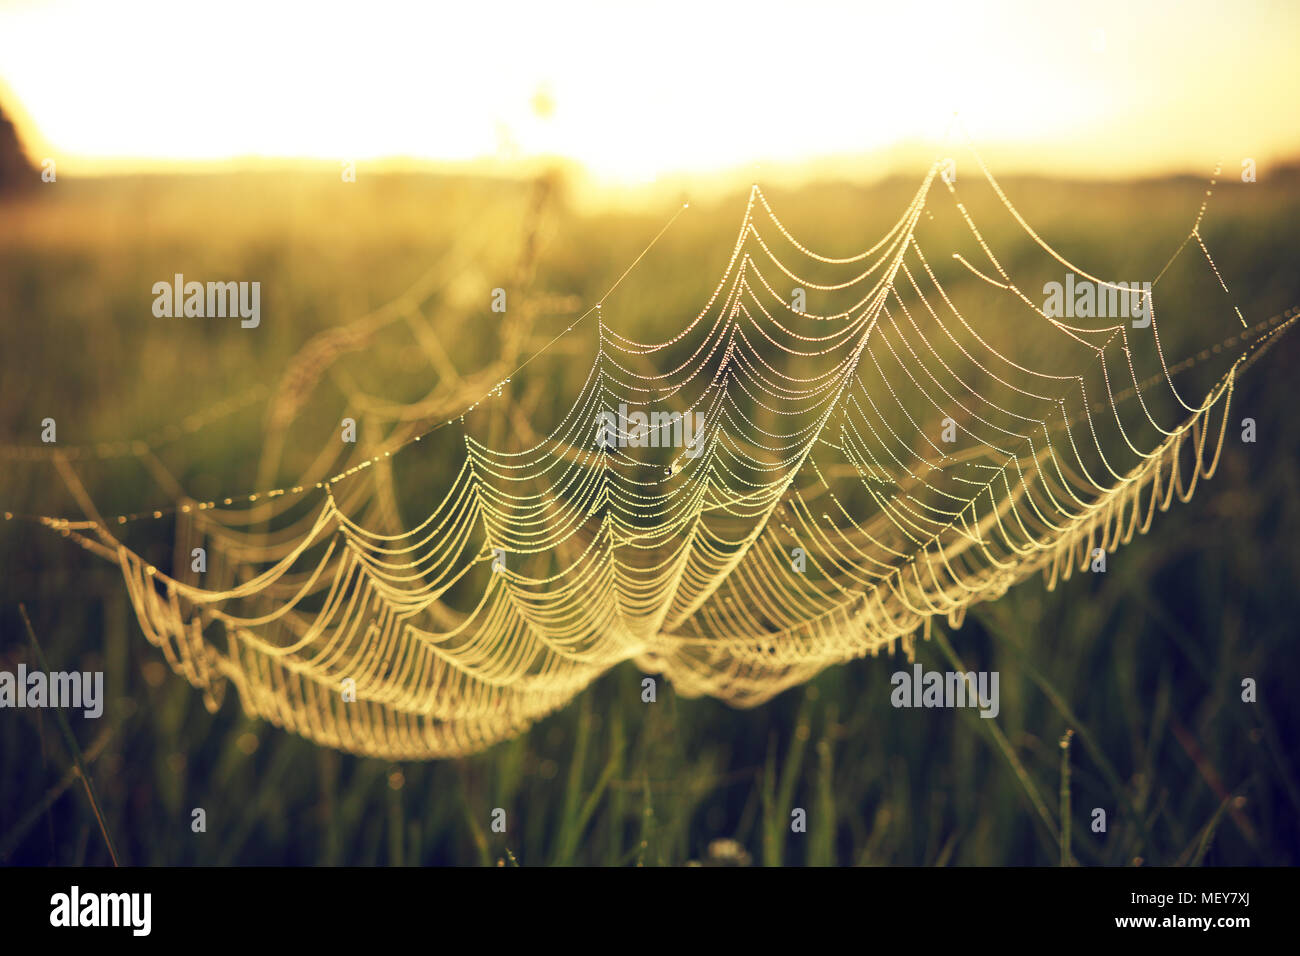 Spring nature background. Natural web with water drops close-up view early in the morning on the meadow. Stock Photo